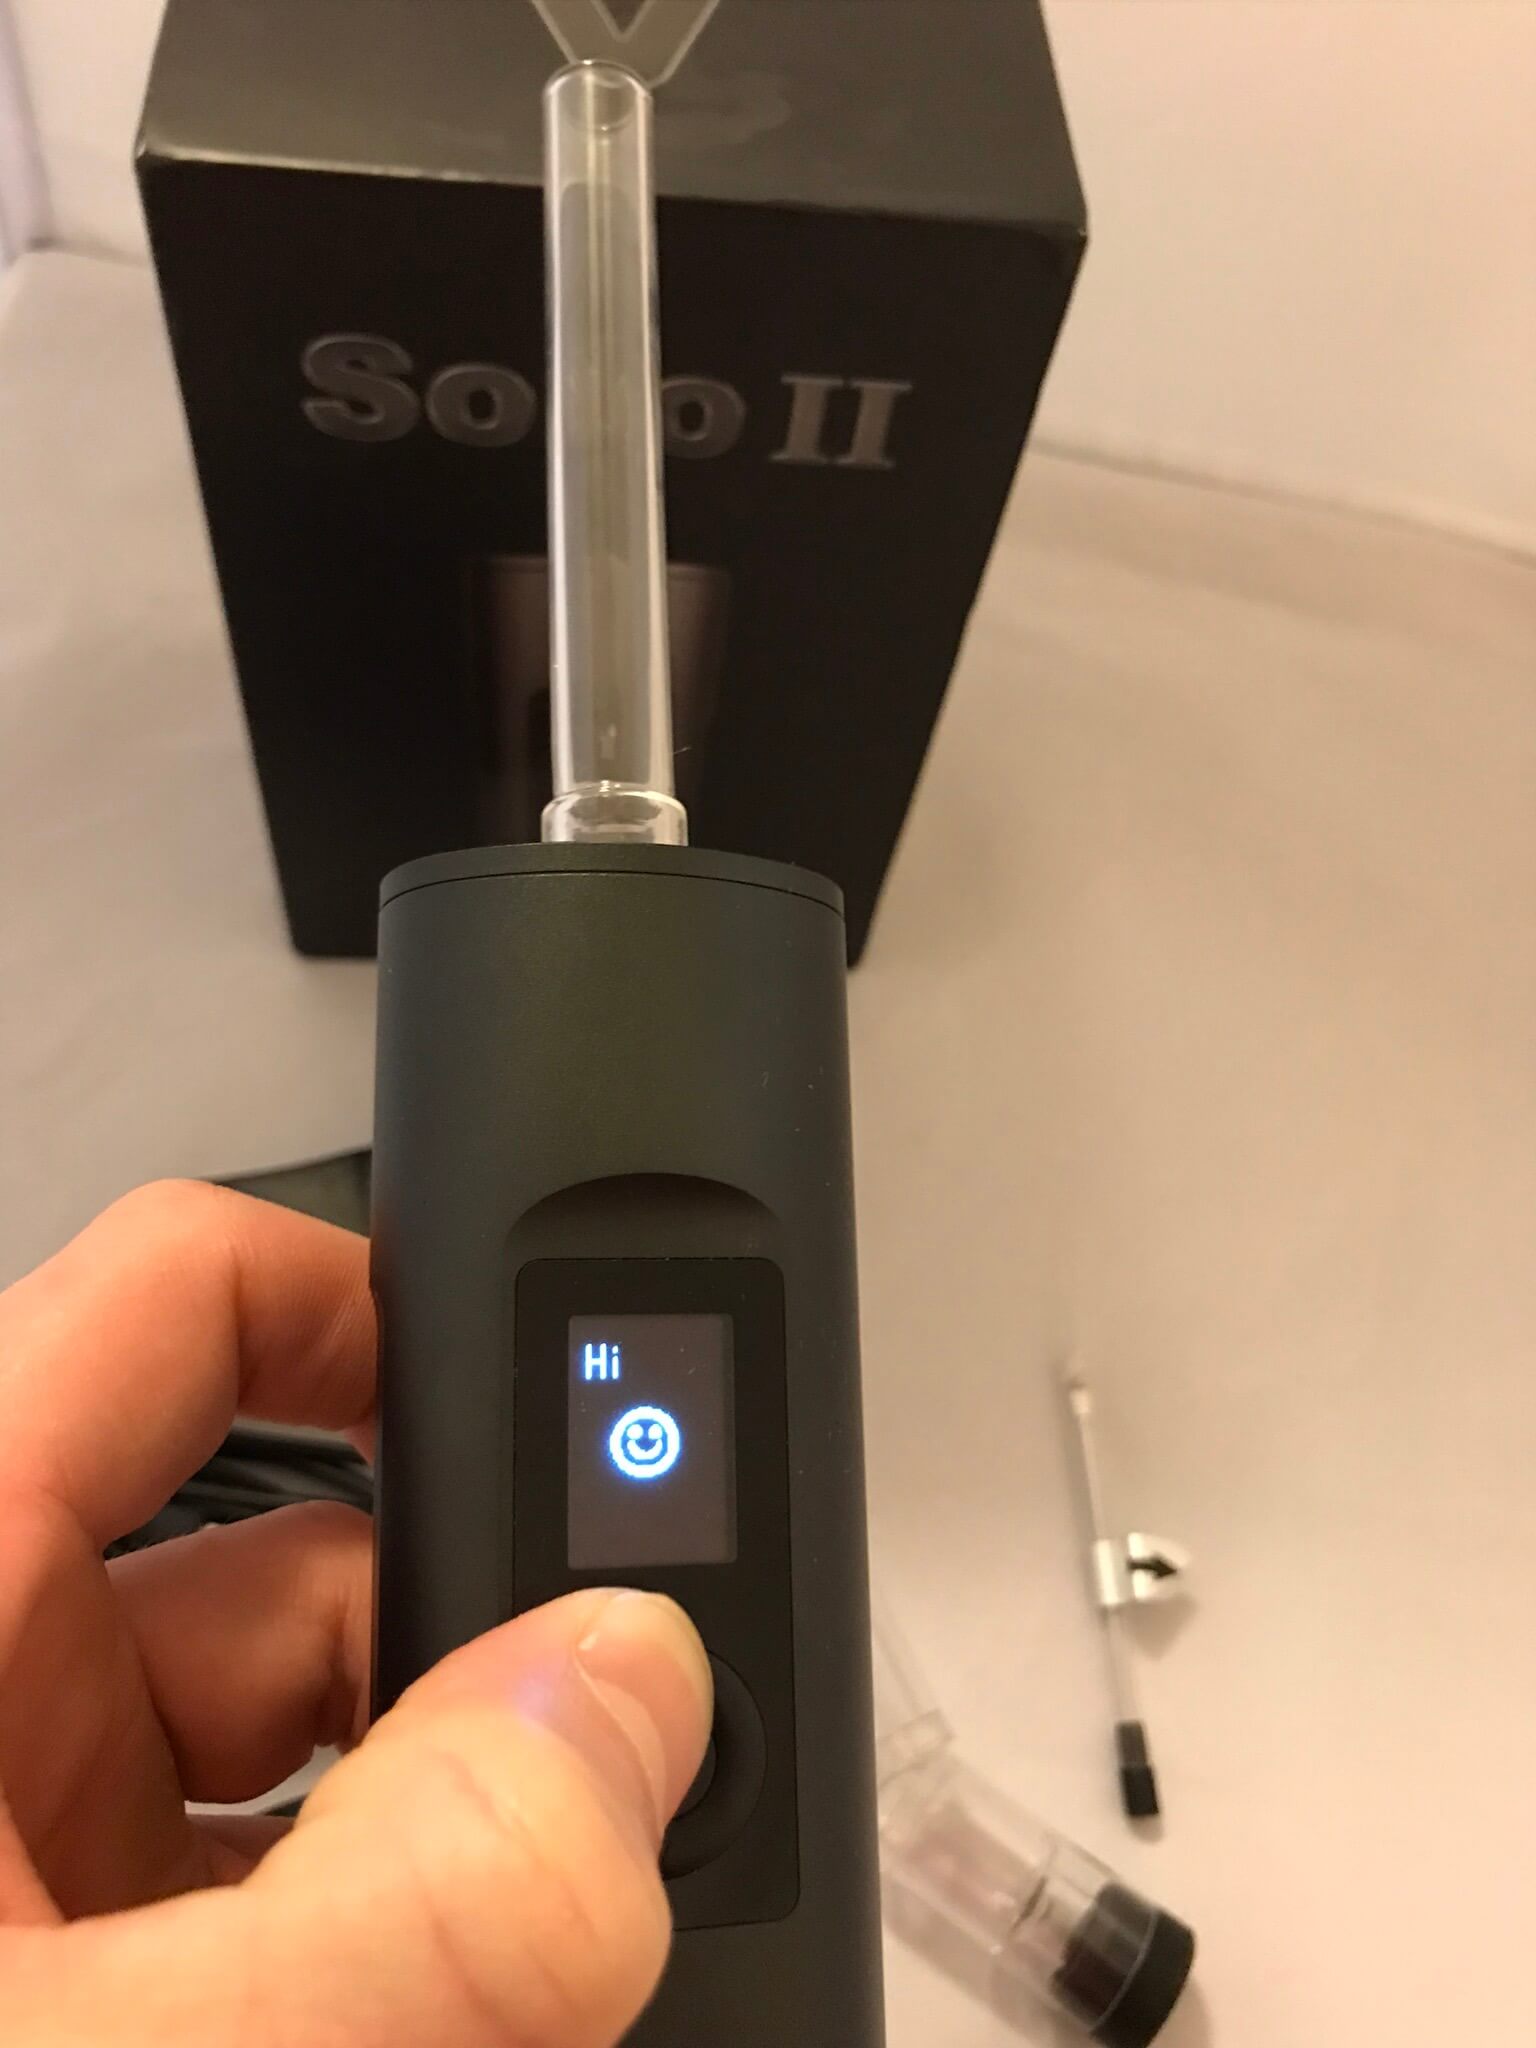 Arizer Solo 2 Vaporizer • Only $118.99 + Free Shipping USA